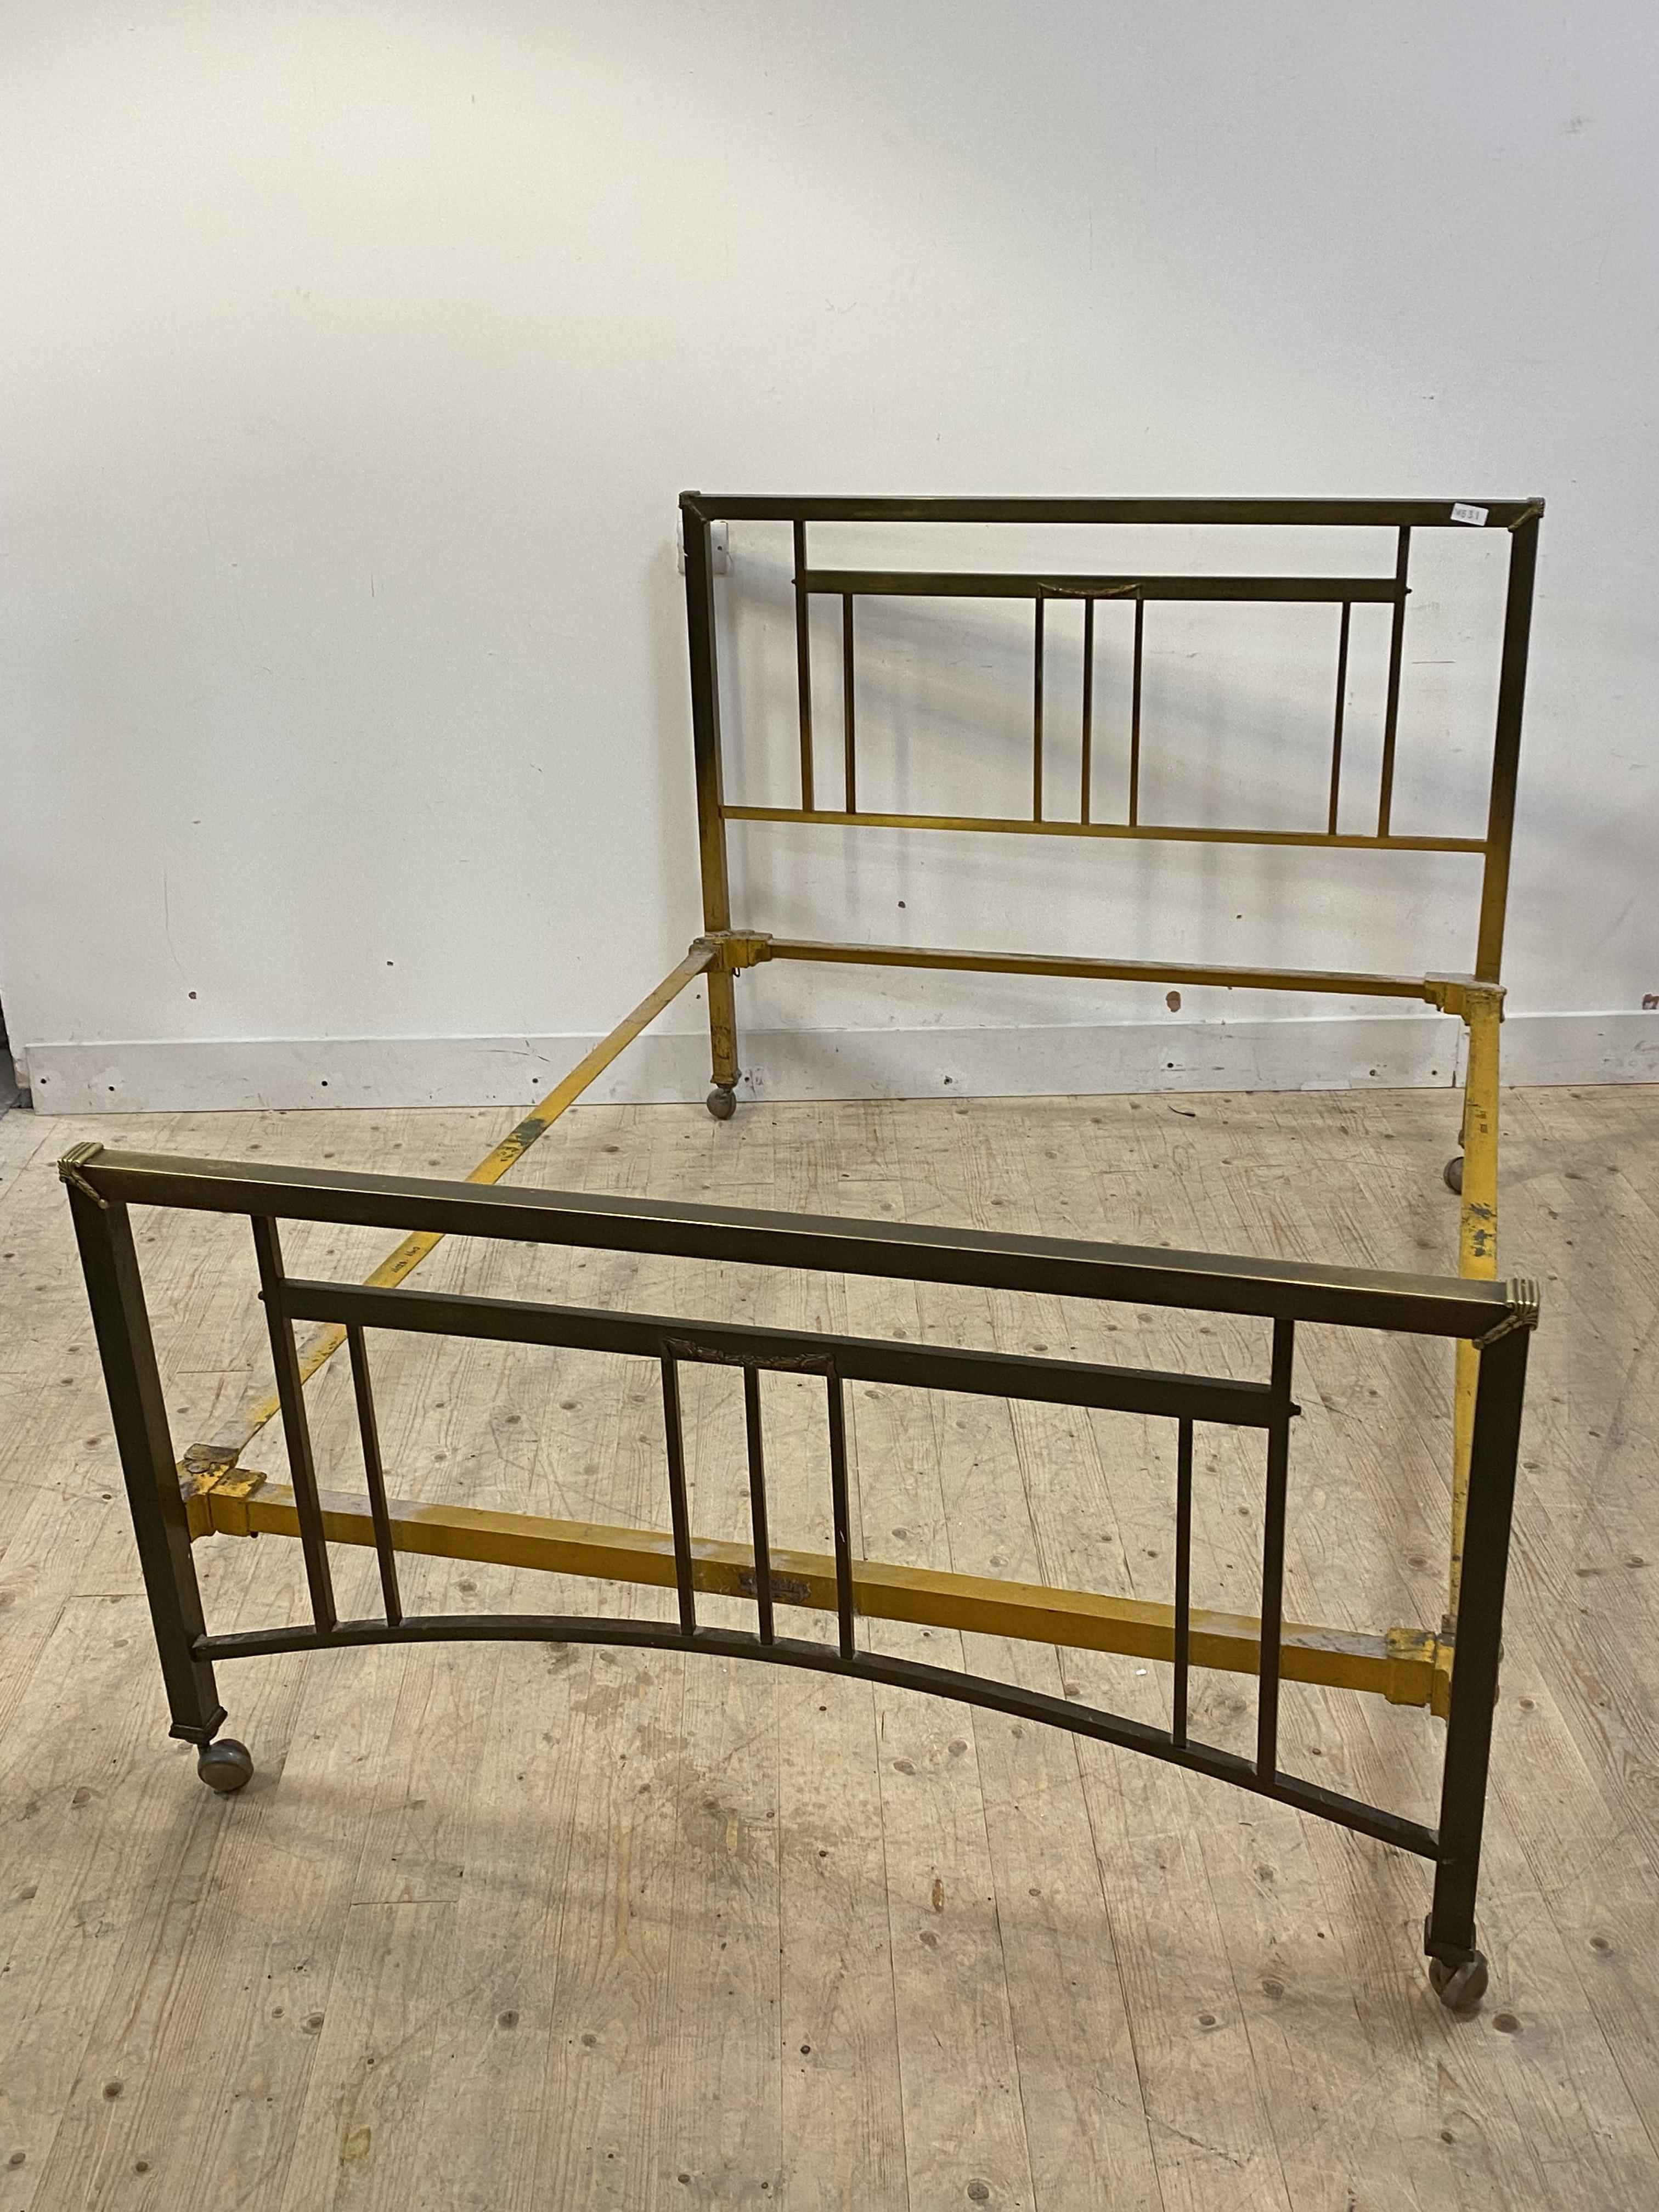 An early to mid 20th century square section brass framed 4'6" double bed, the frame with applied